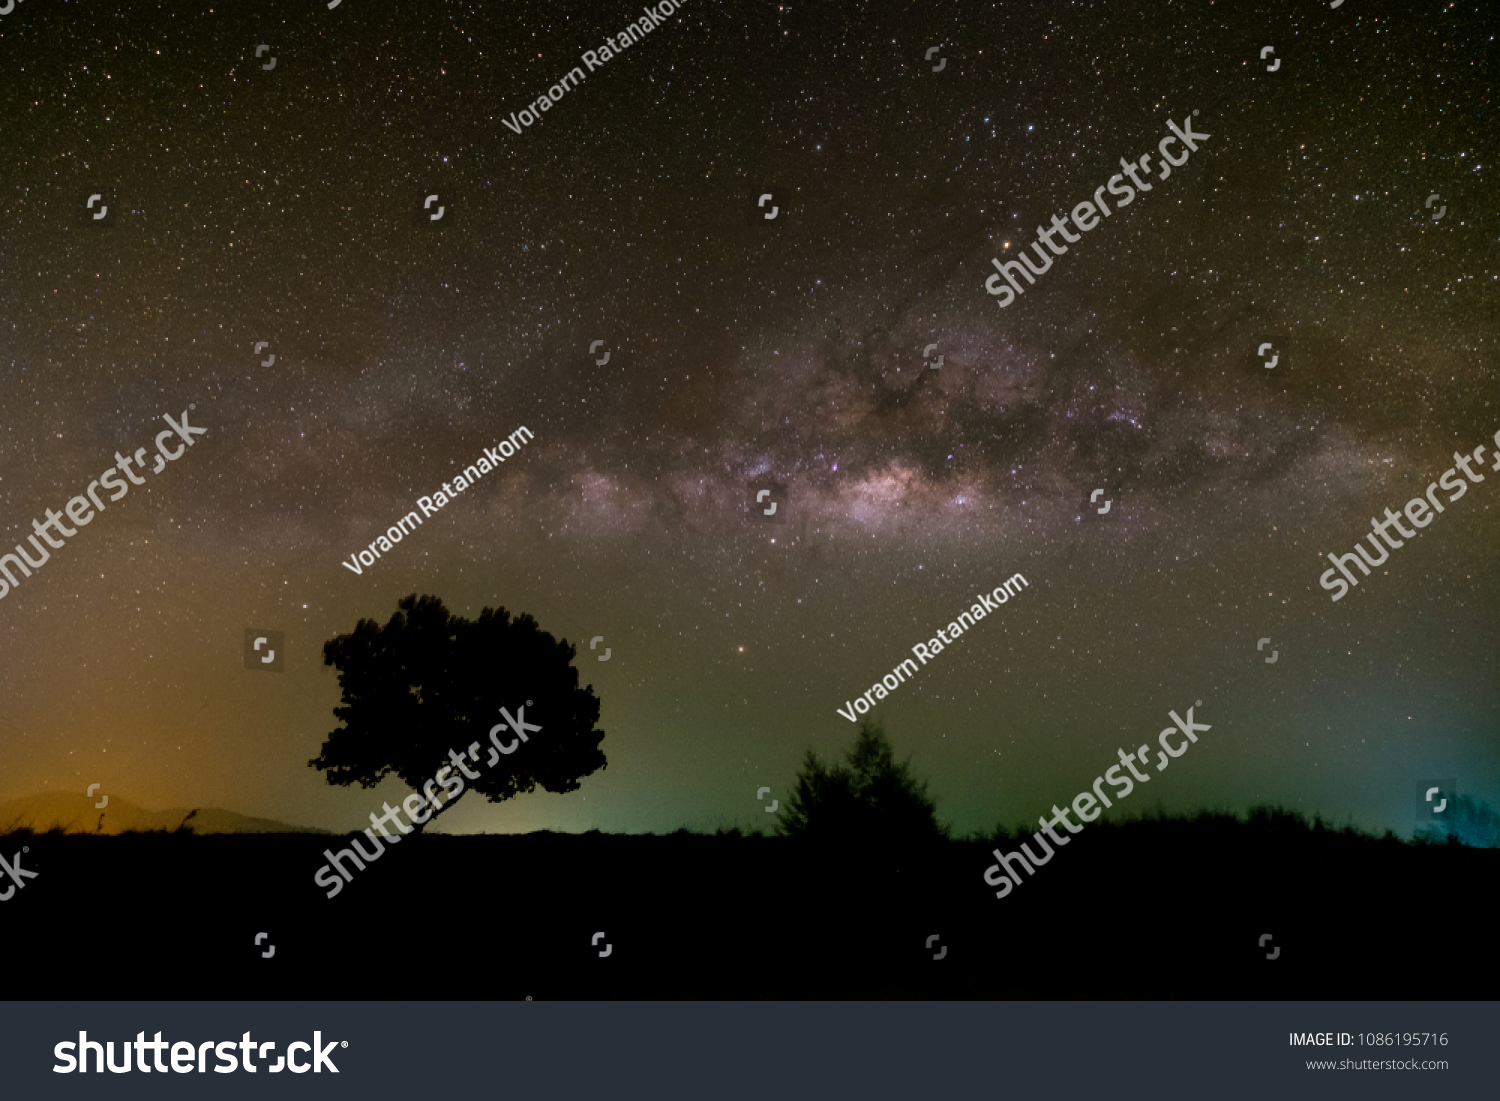 Milky way galaxy brightening in the night sky over the mountain. #1086195716